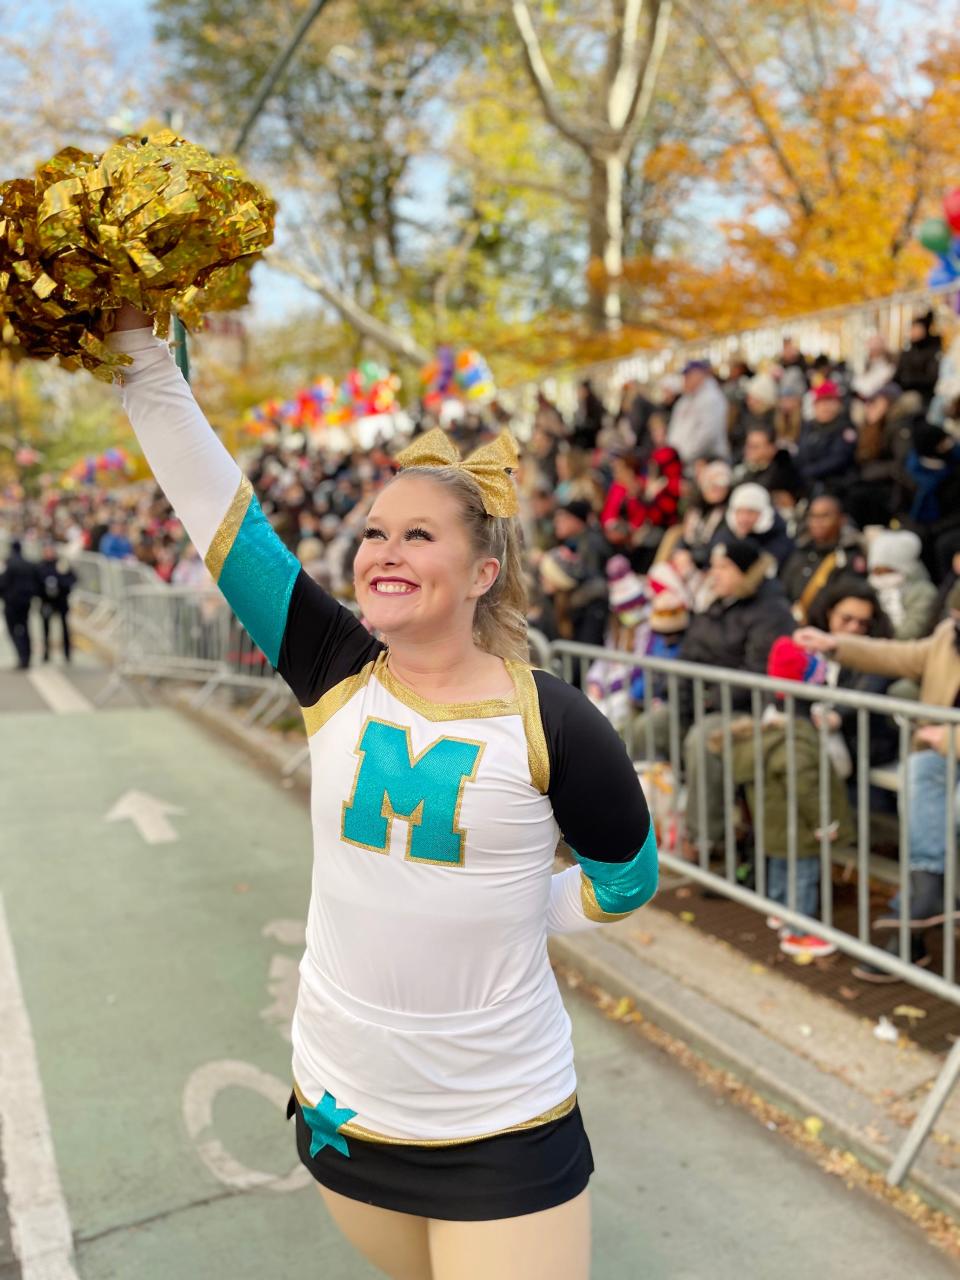 Washington High School cheerleader Becca Madden waves to spectators along the route at the Macy’s Thanksgiving Day parade.